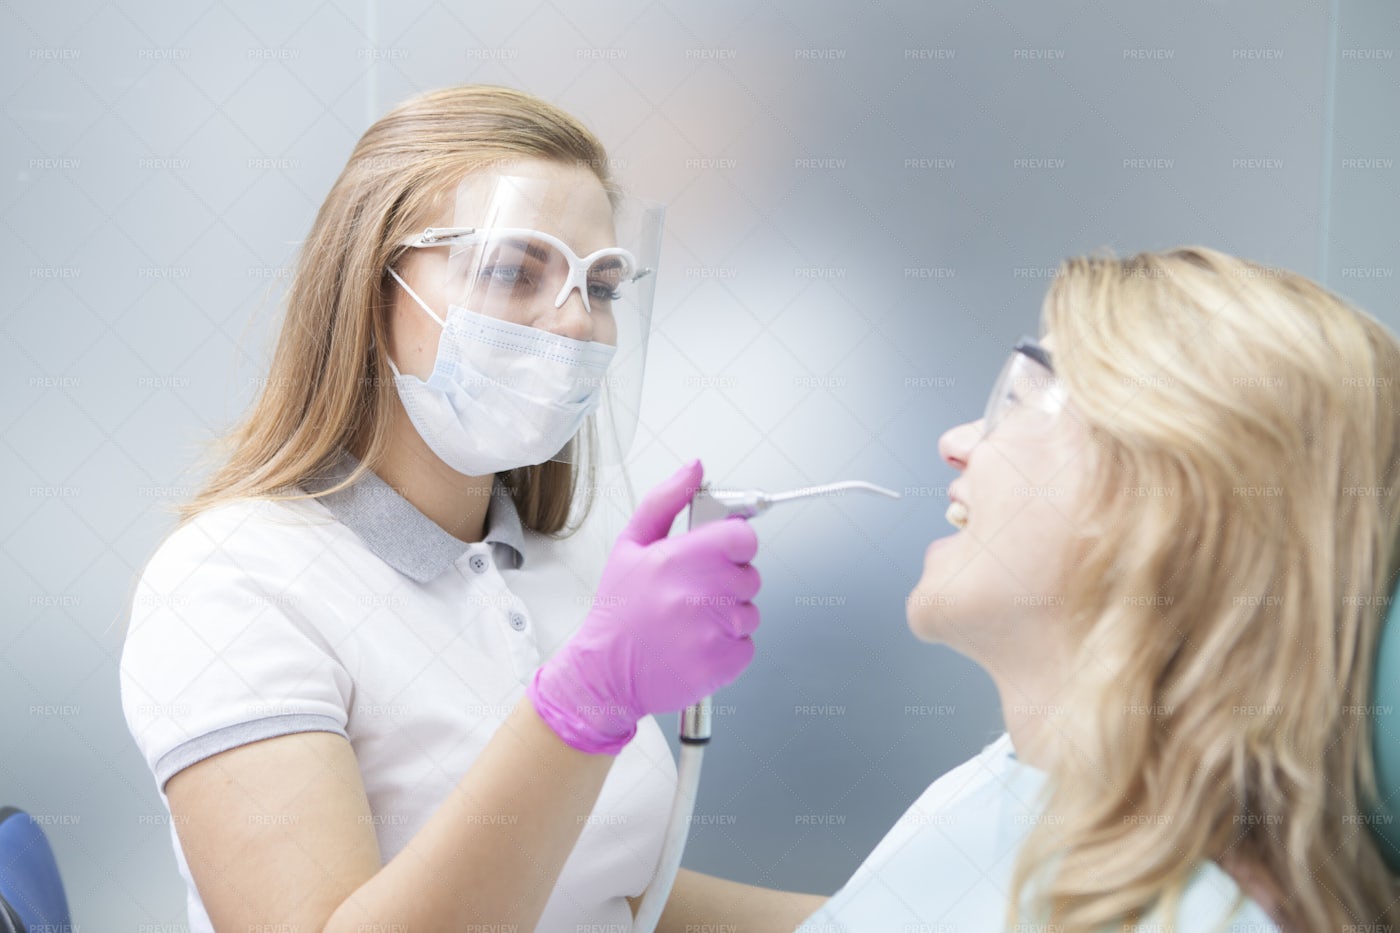 Dentist Working During Pandemic: Stock Photos